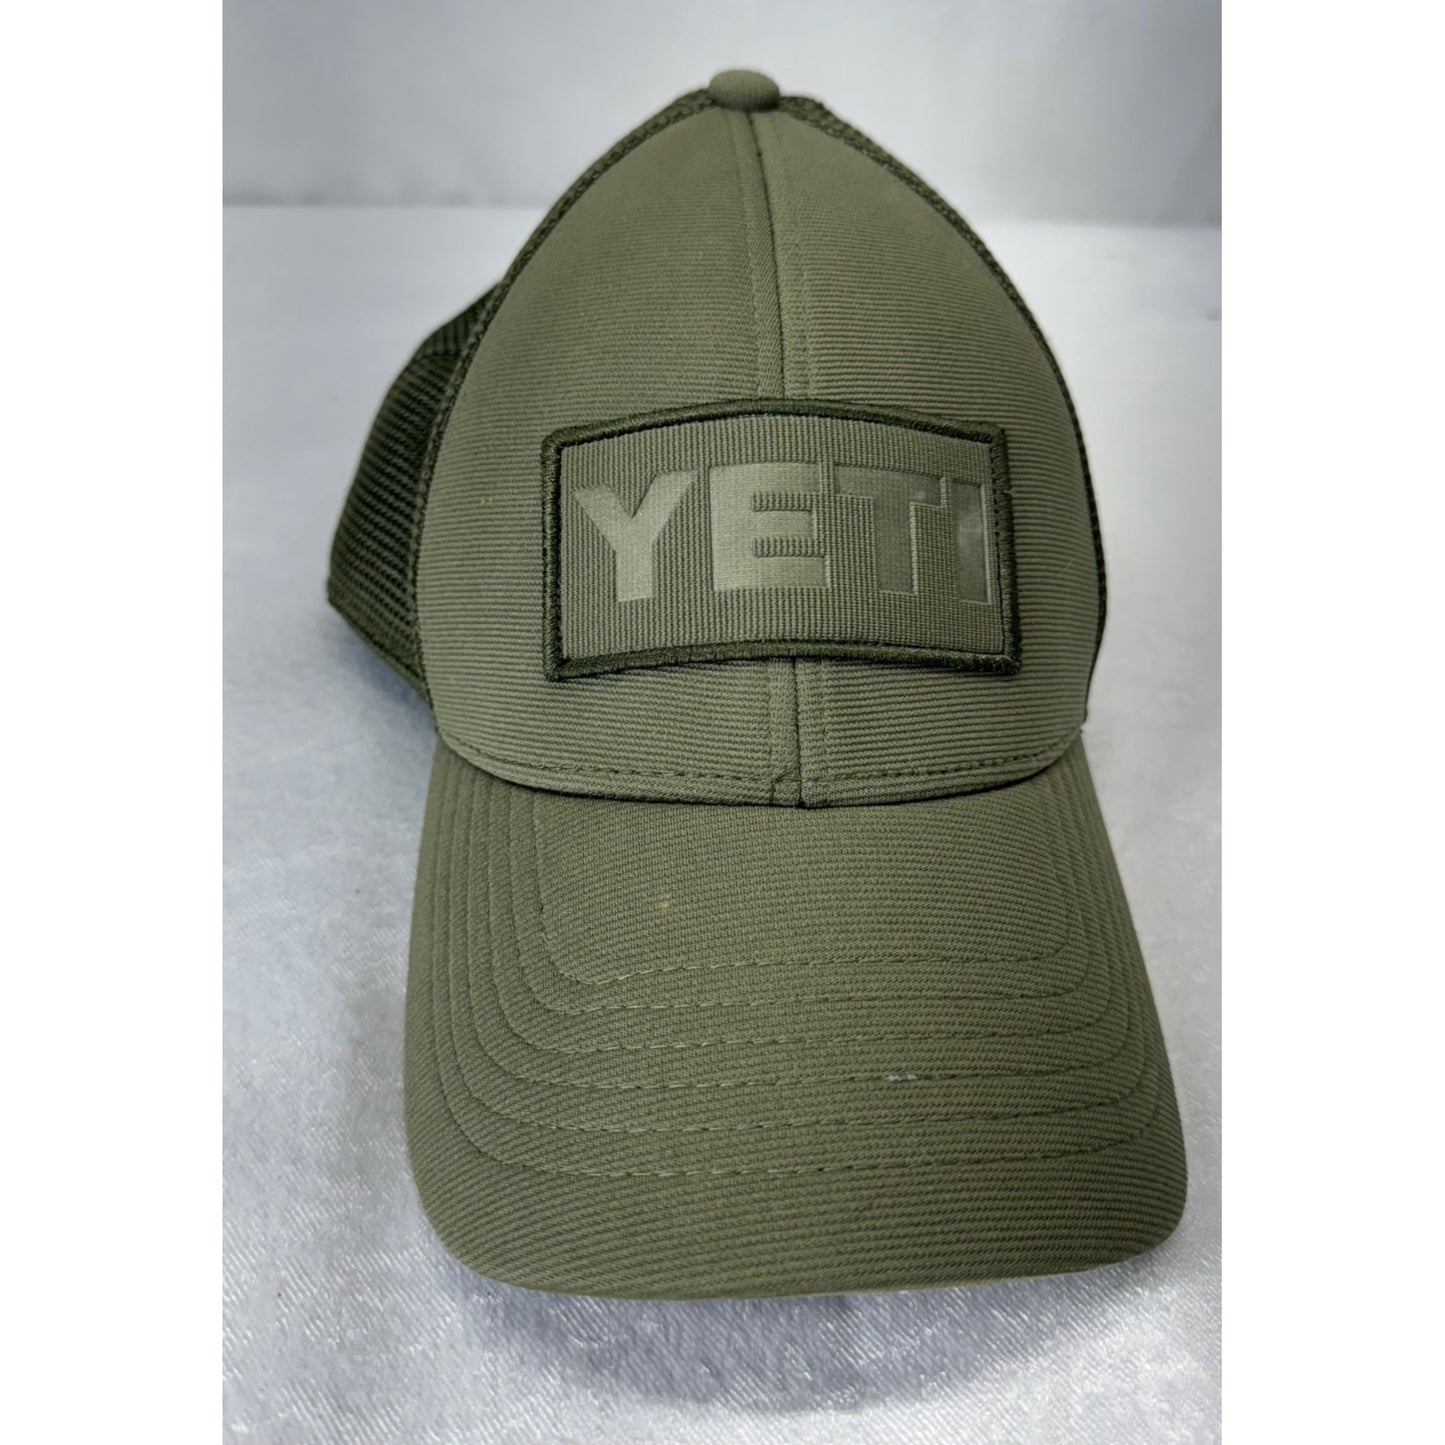 YETI Hat Olive Green SnapBack Adult One Size Fits All Adjustable